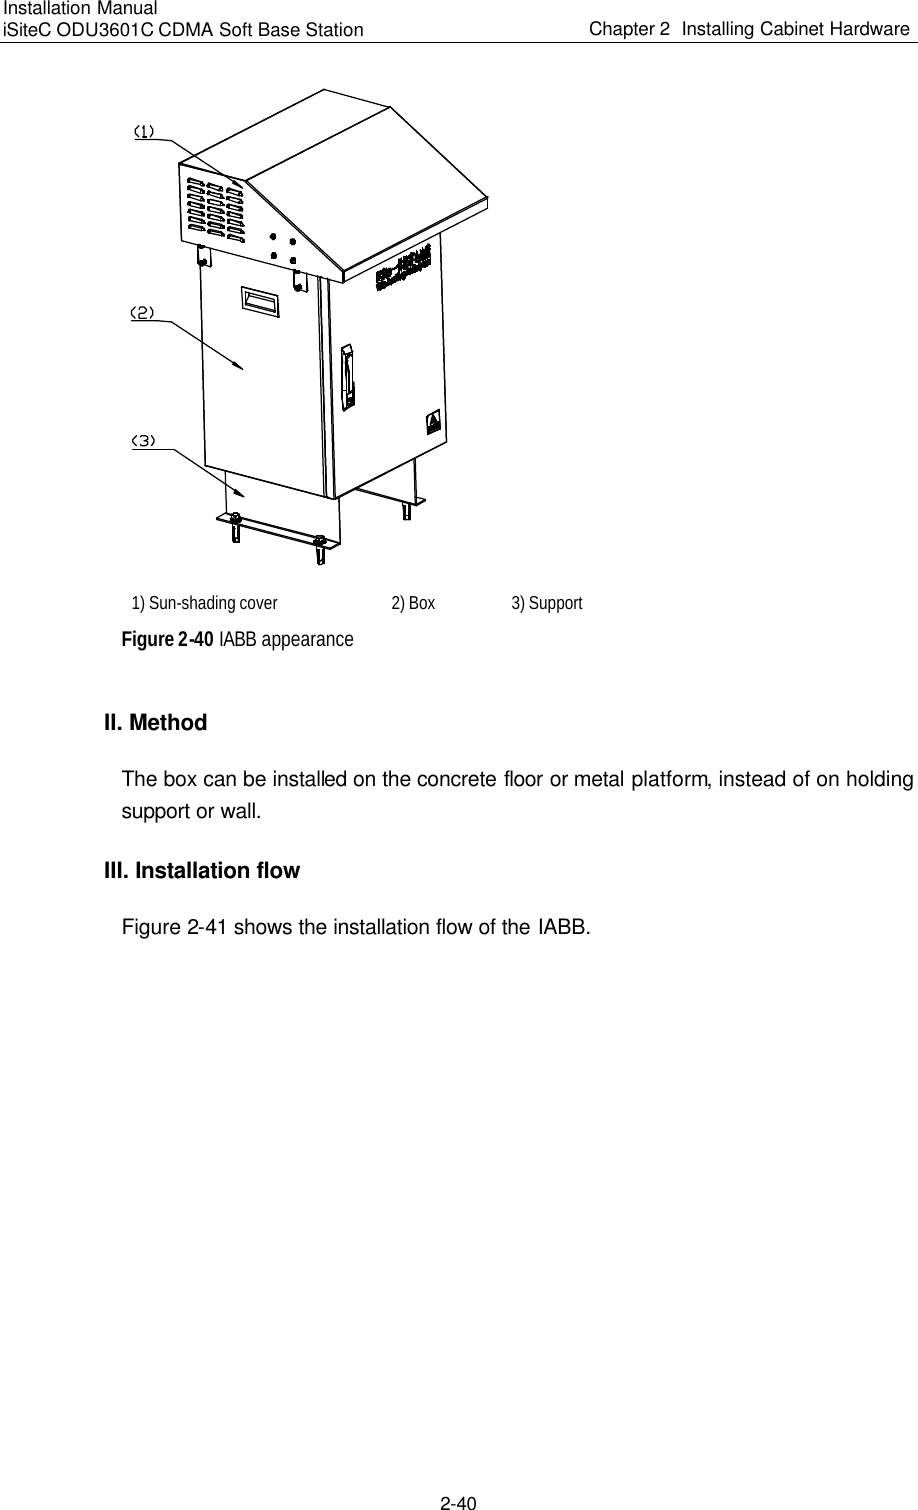 Installation Manual   iSiteC ODU3601C CDMA Soft Base Station Chapter 2  Installing Cabinet Hardware  2-40   1) Sun-shading cover   2) Box   3) Support Figure 2-40 IABB appearance II. Method The box can be installed on the concrete floor or metal platform, instead of on holding support or wall.  III. Installation flow Figure 2-41 shows the installation flow of the IABB. 